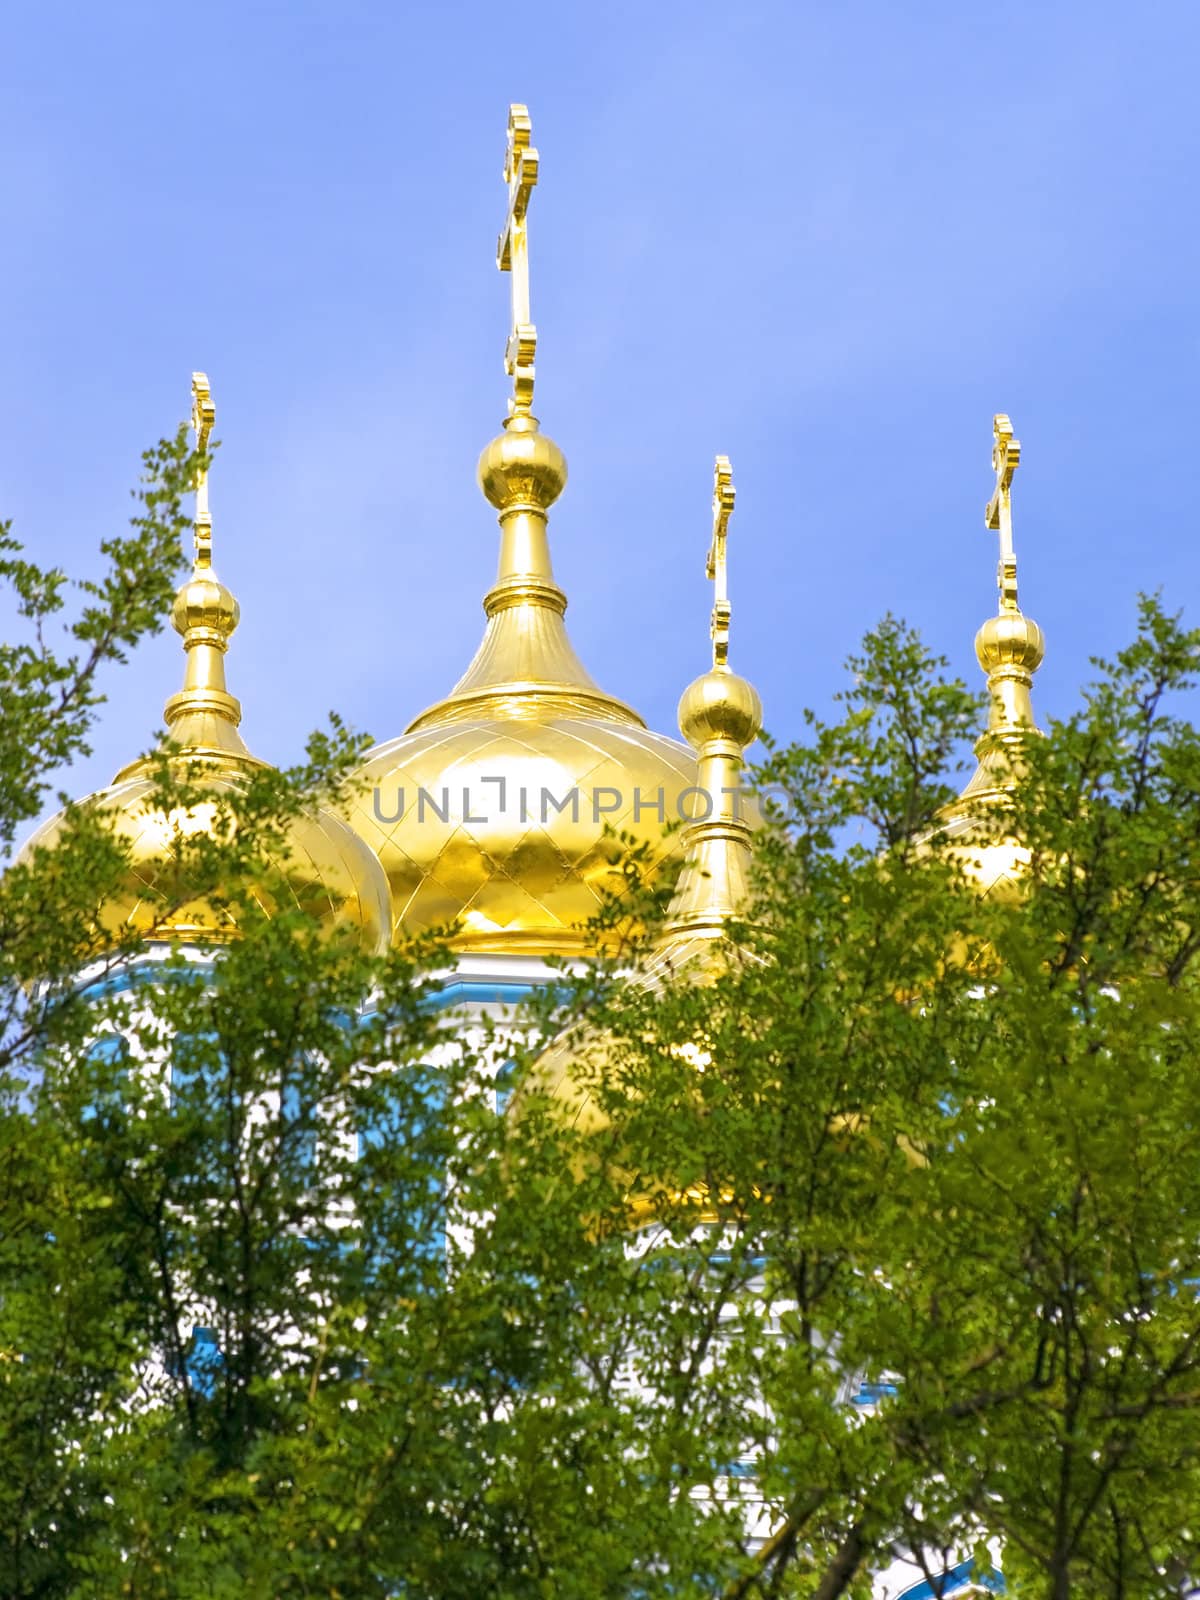 Golden cupola of the church against the blue sky